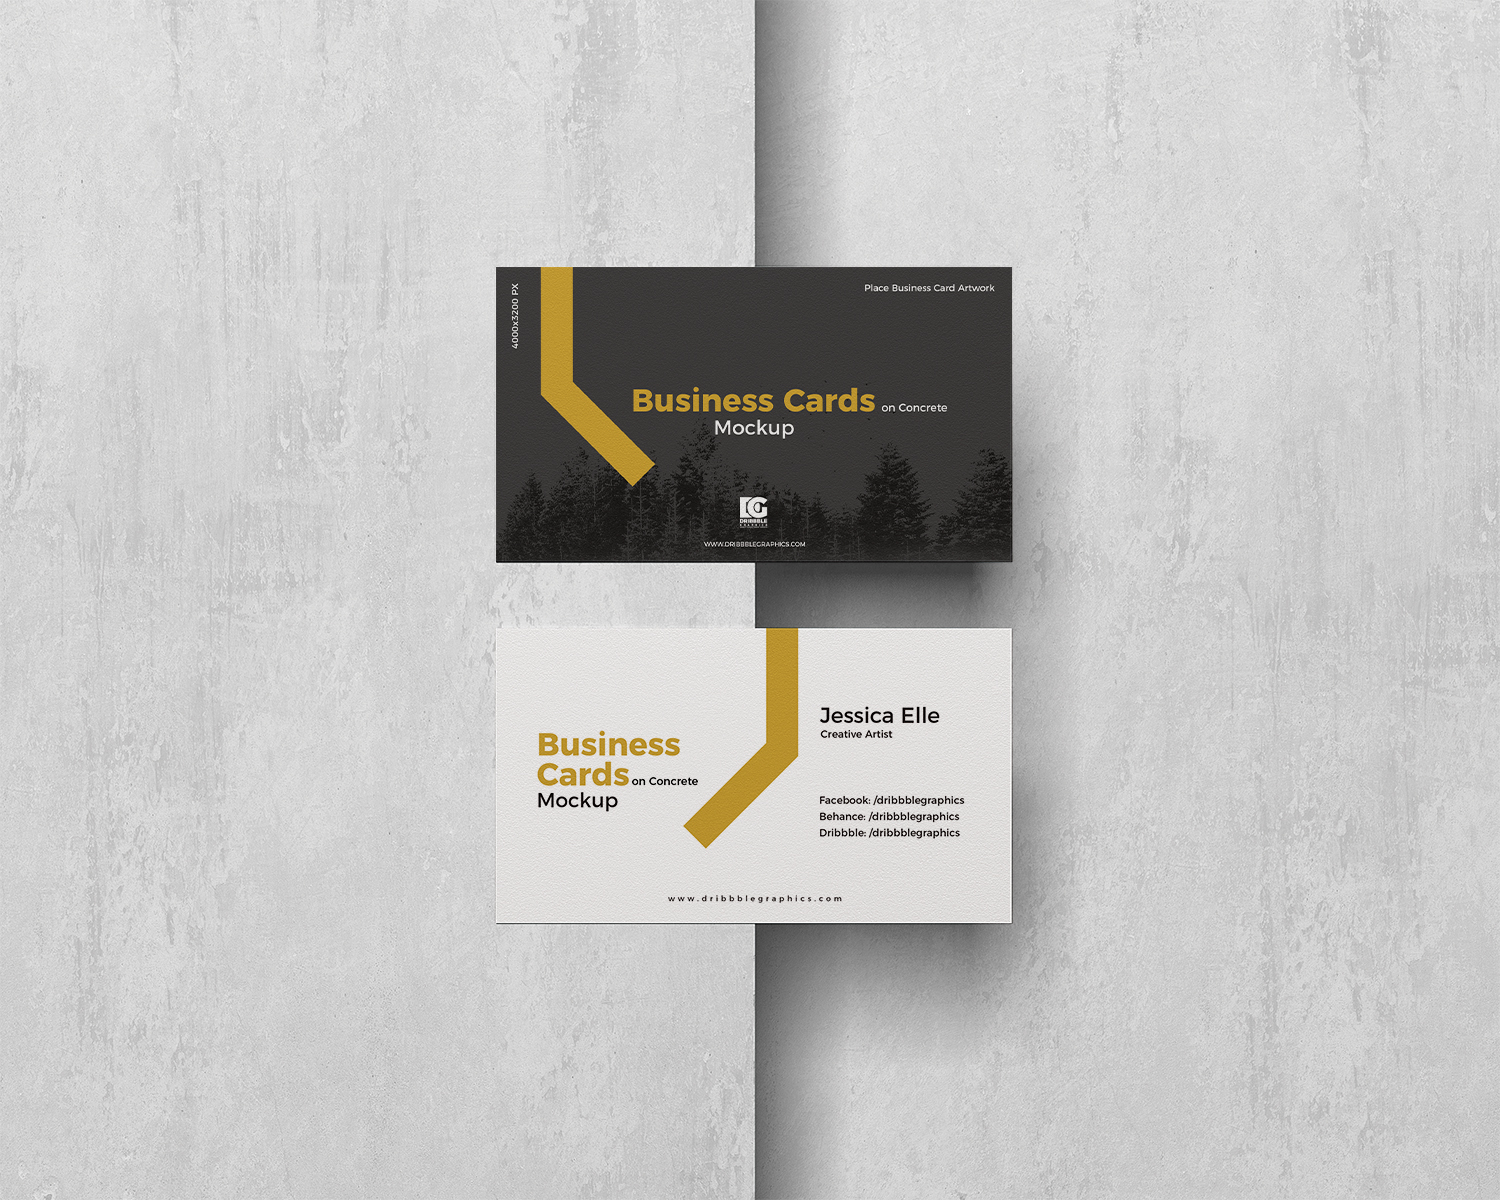 Free Business Cards on Concrete Mockup